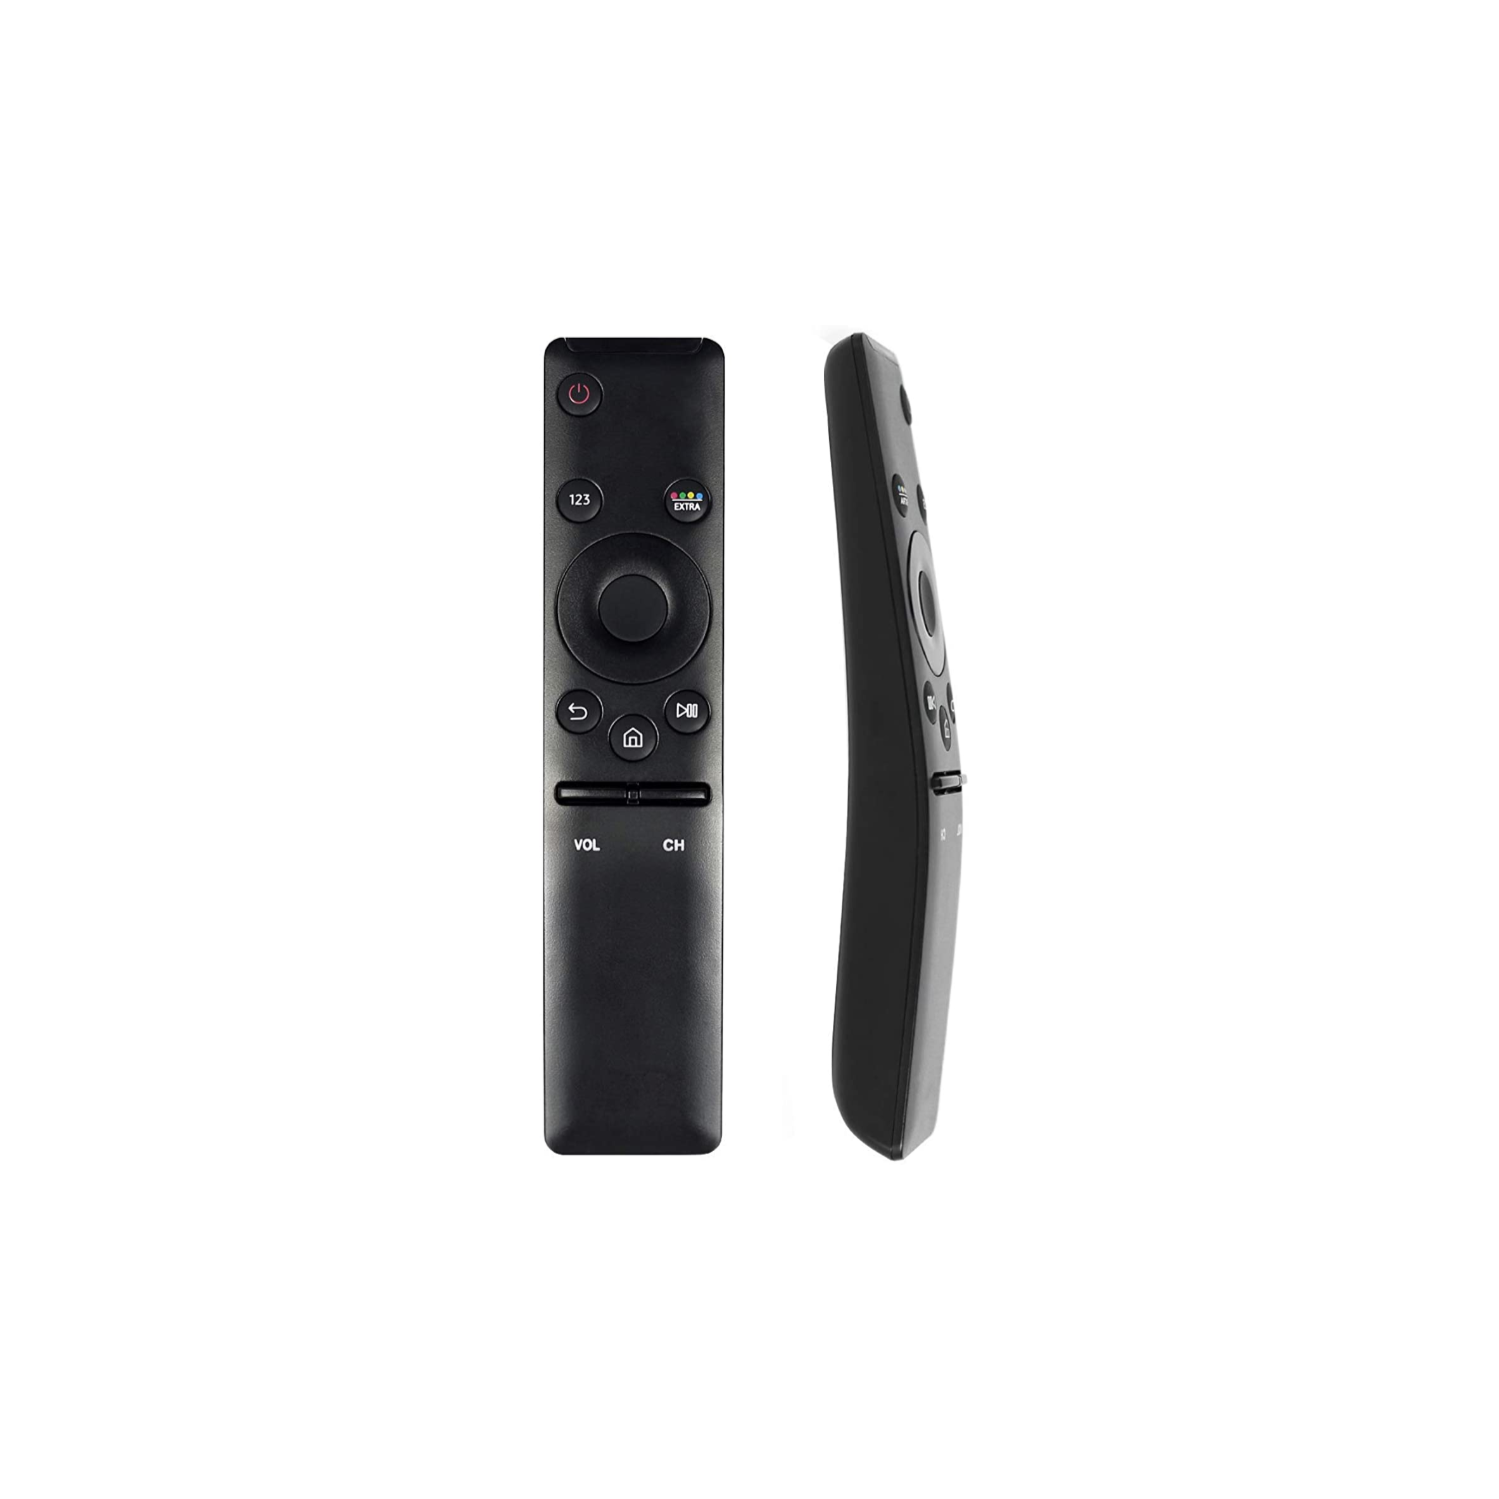 LCD Smart TV Remote Control For SAMSUNG TV